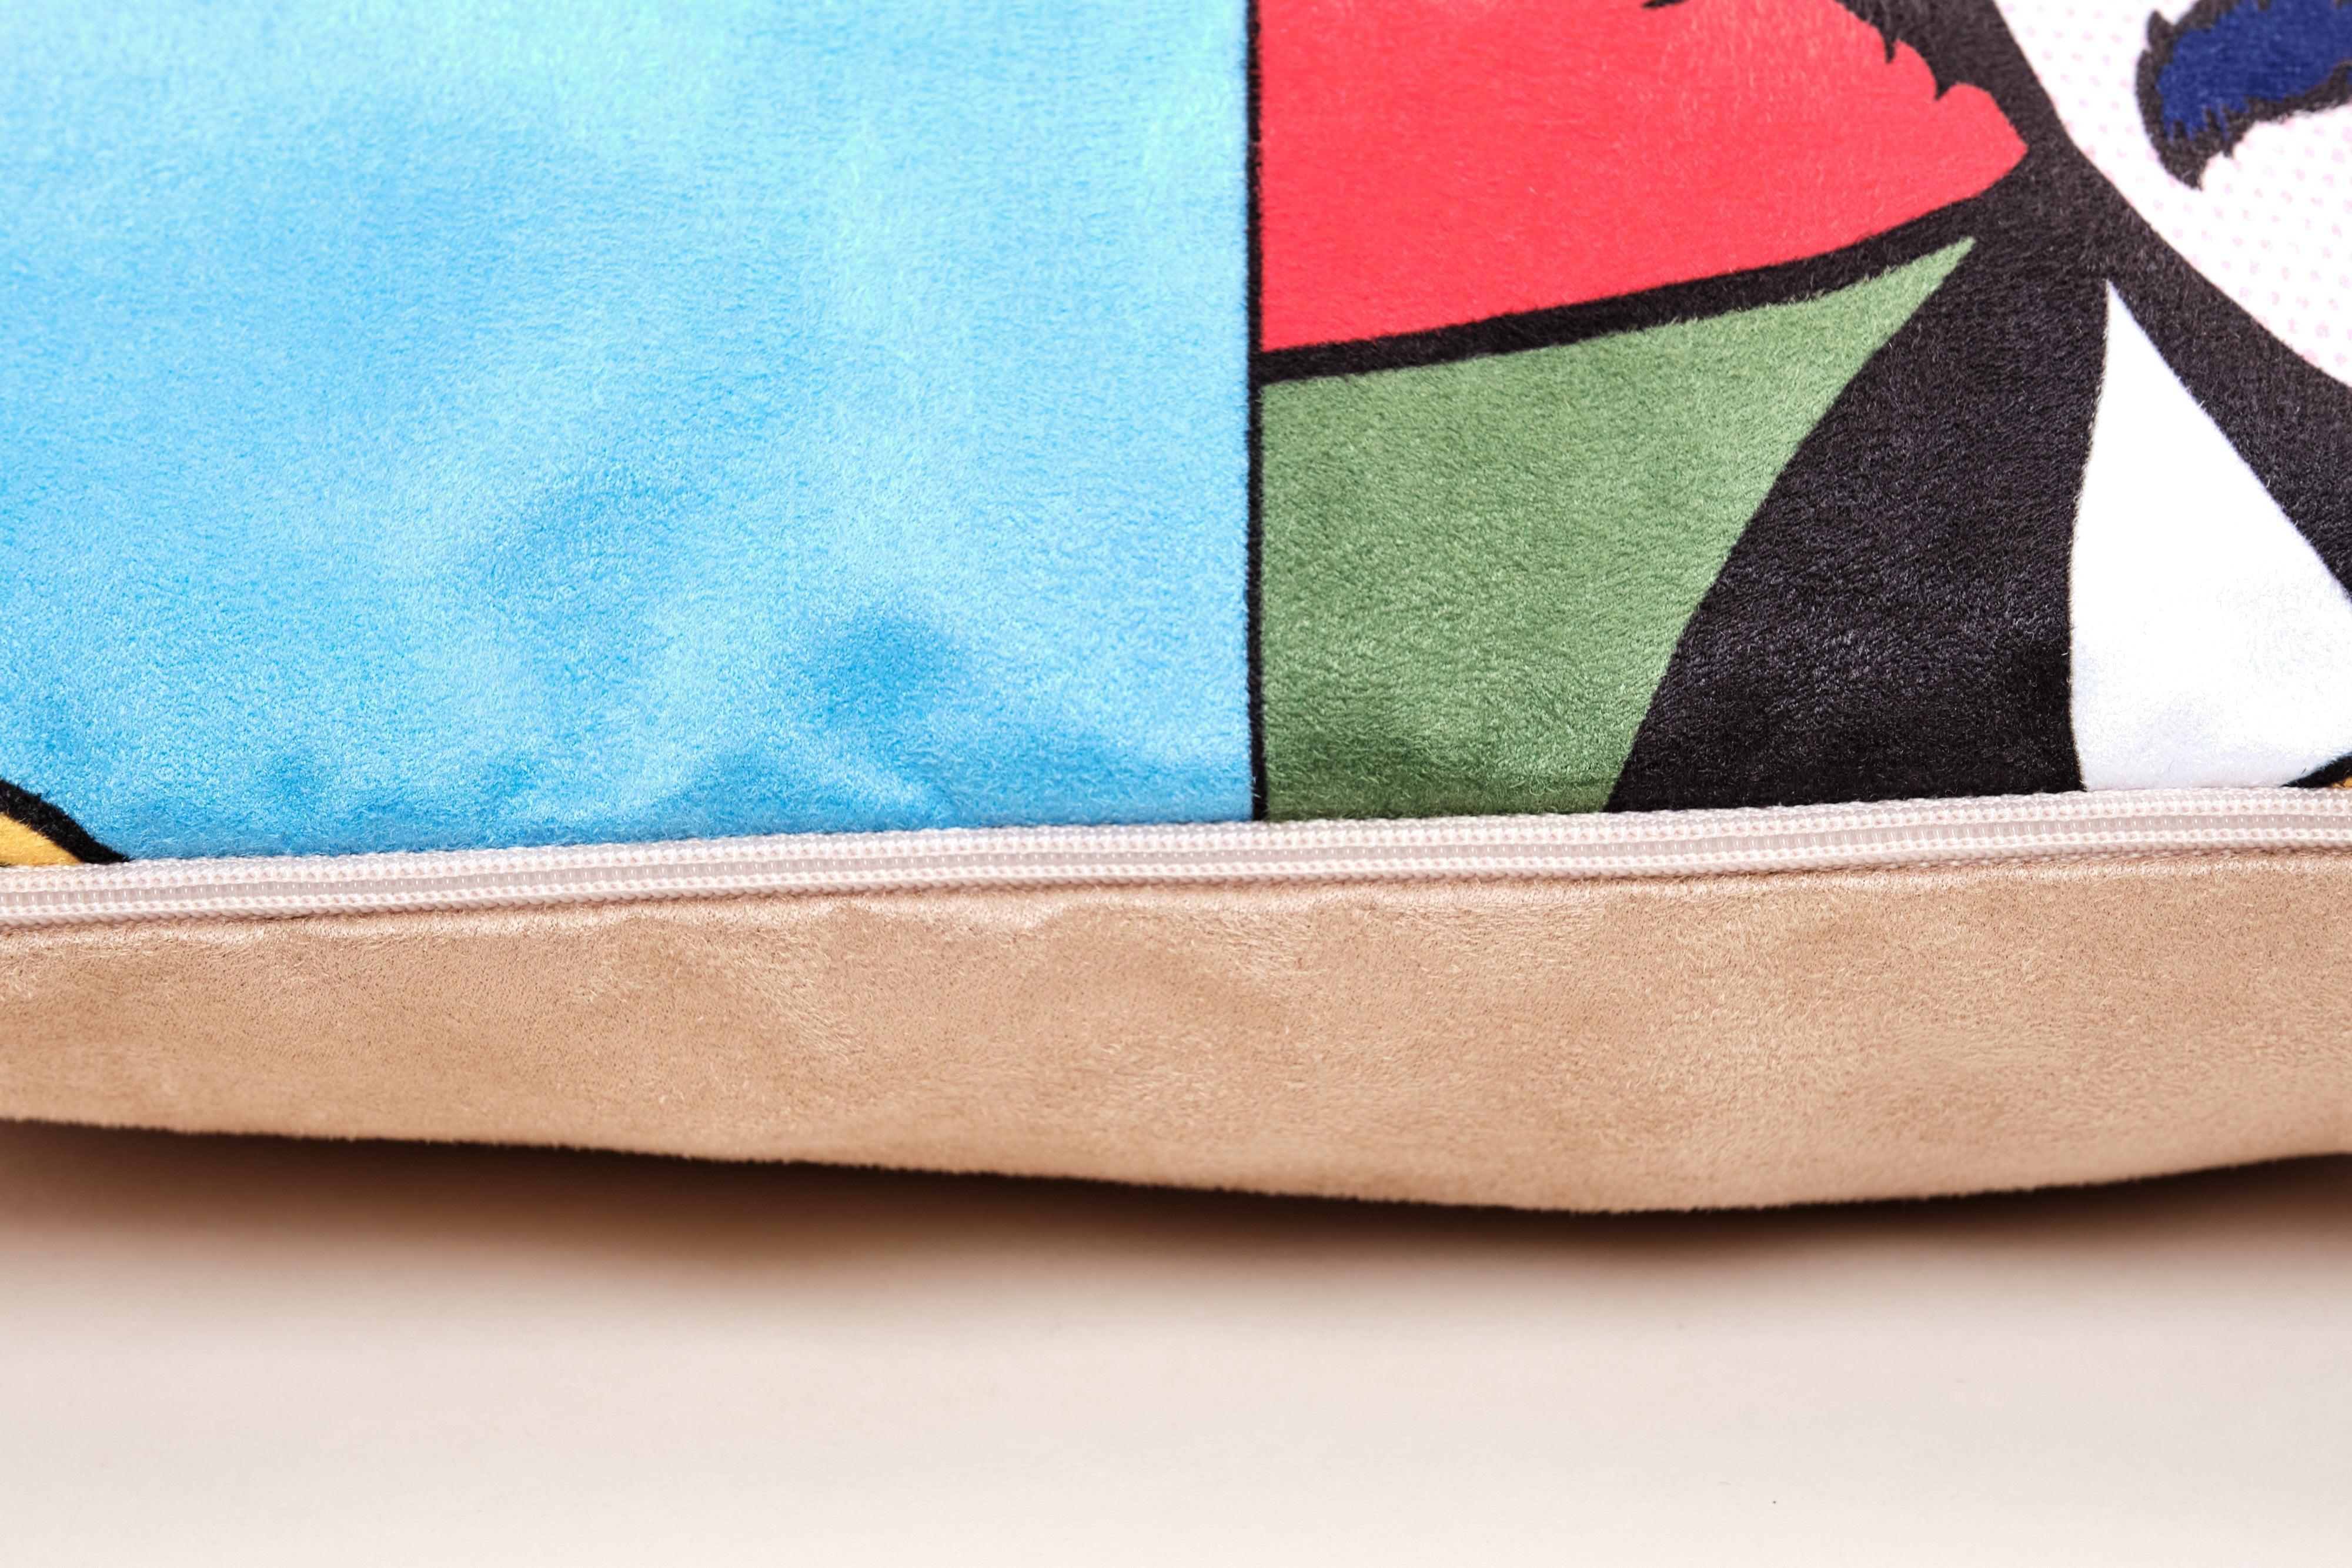 Points of Contact No.18 -TATE - Victor Pasmore Cushion - Handmade Cushions UK - WeLoveCushions